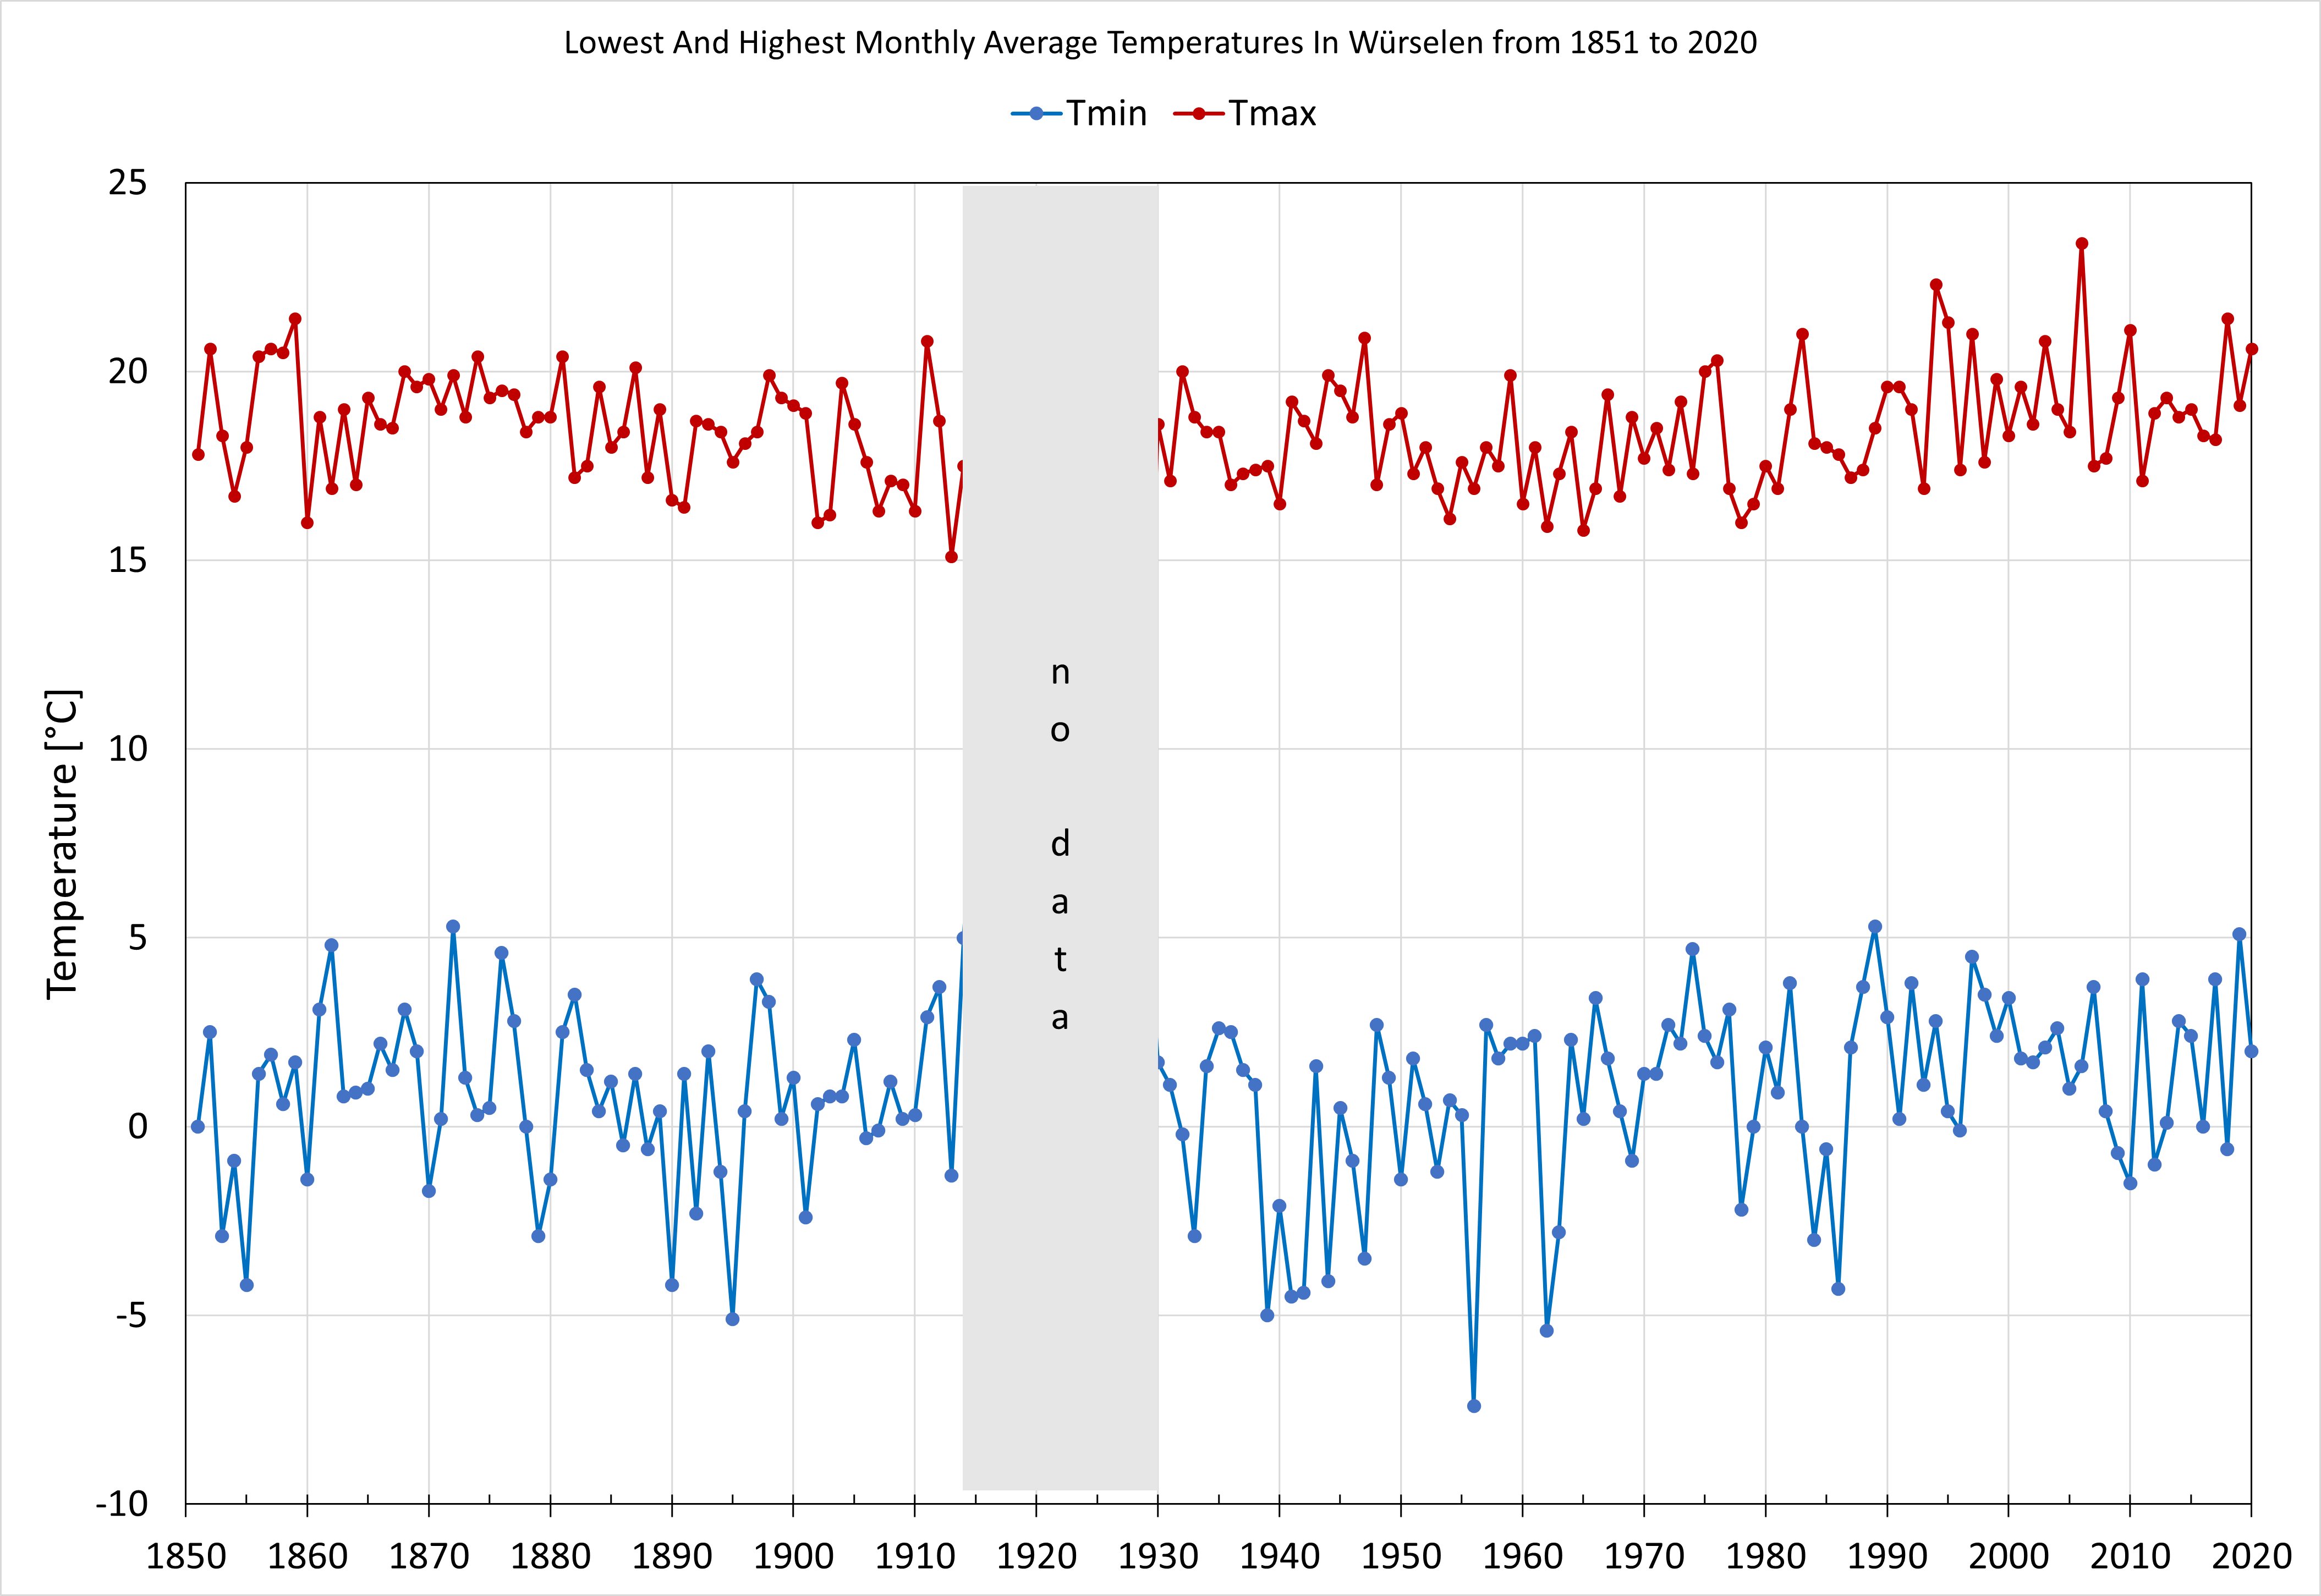 1851 to 2020 lowest and highest monthly temperature